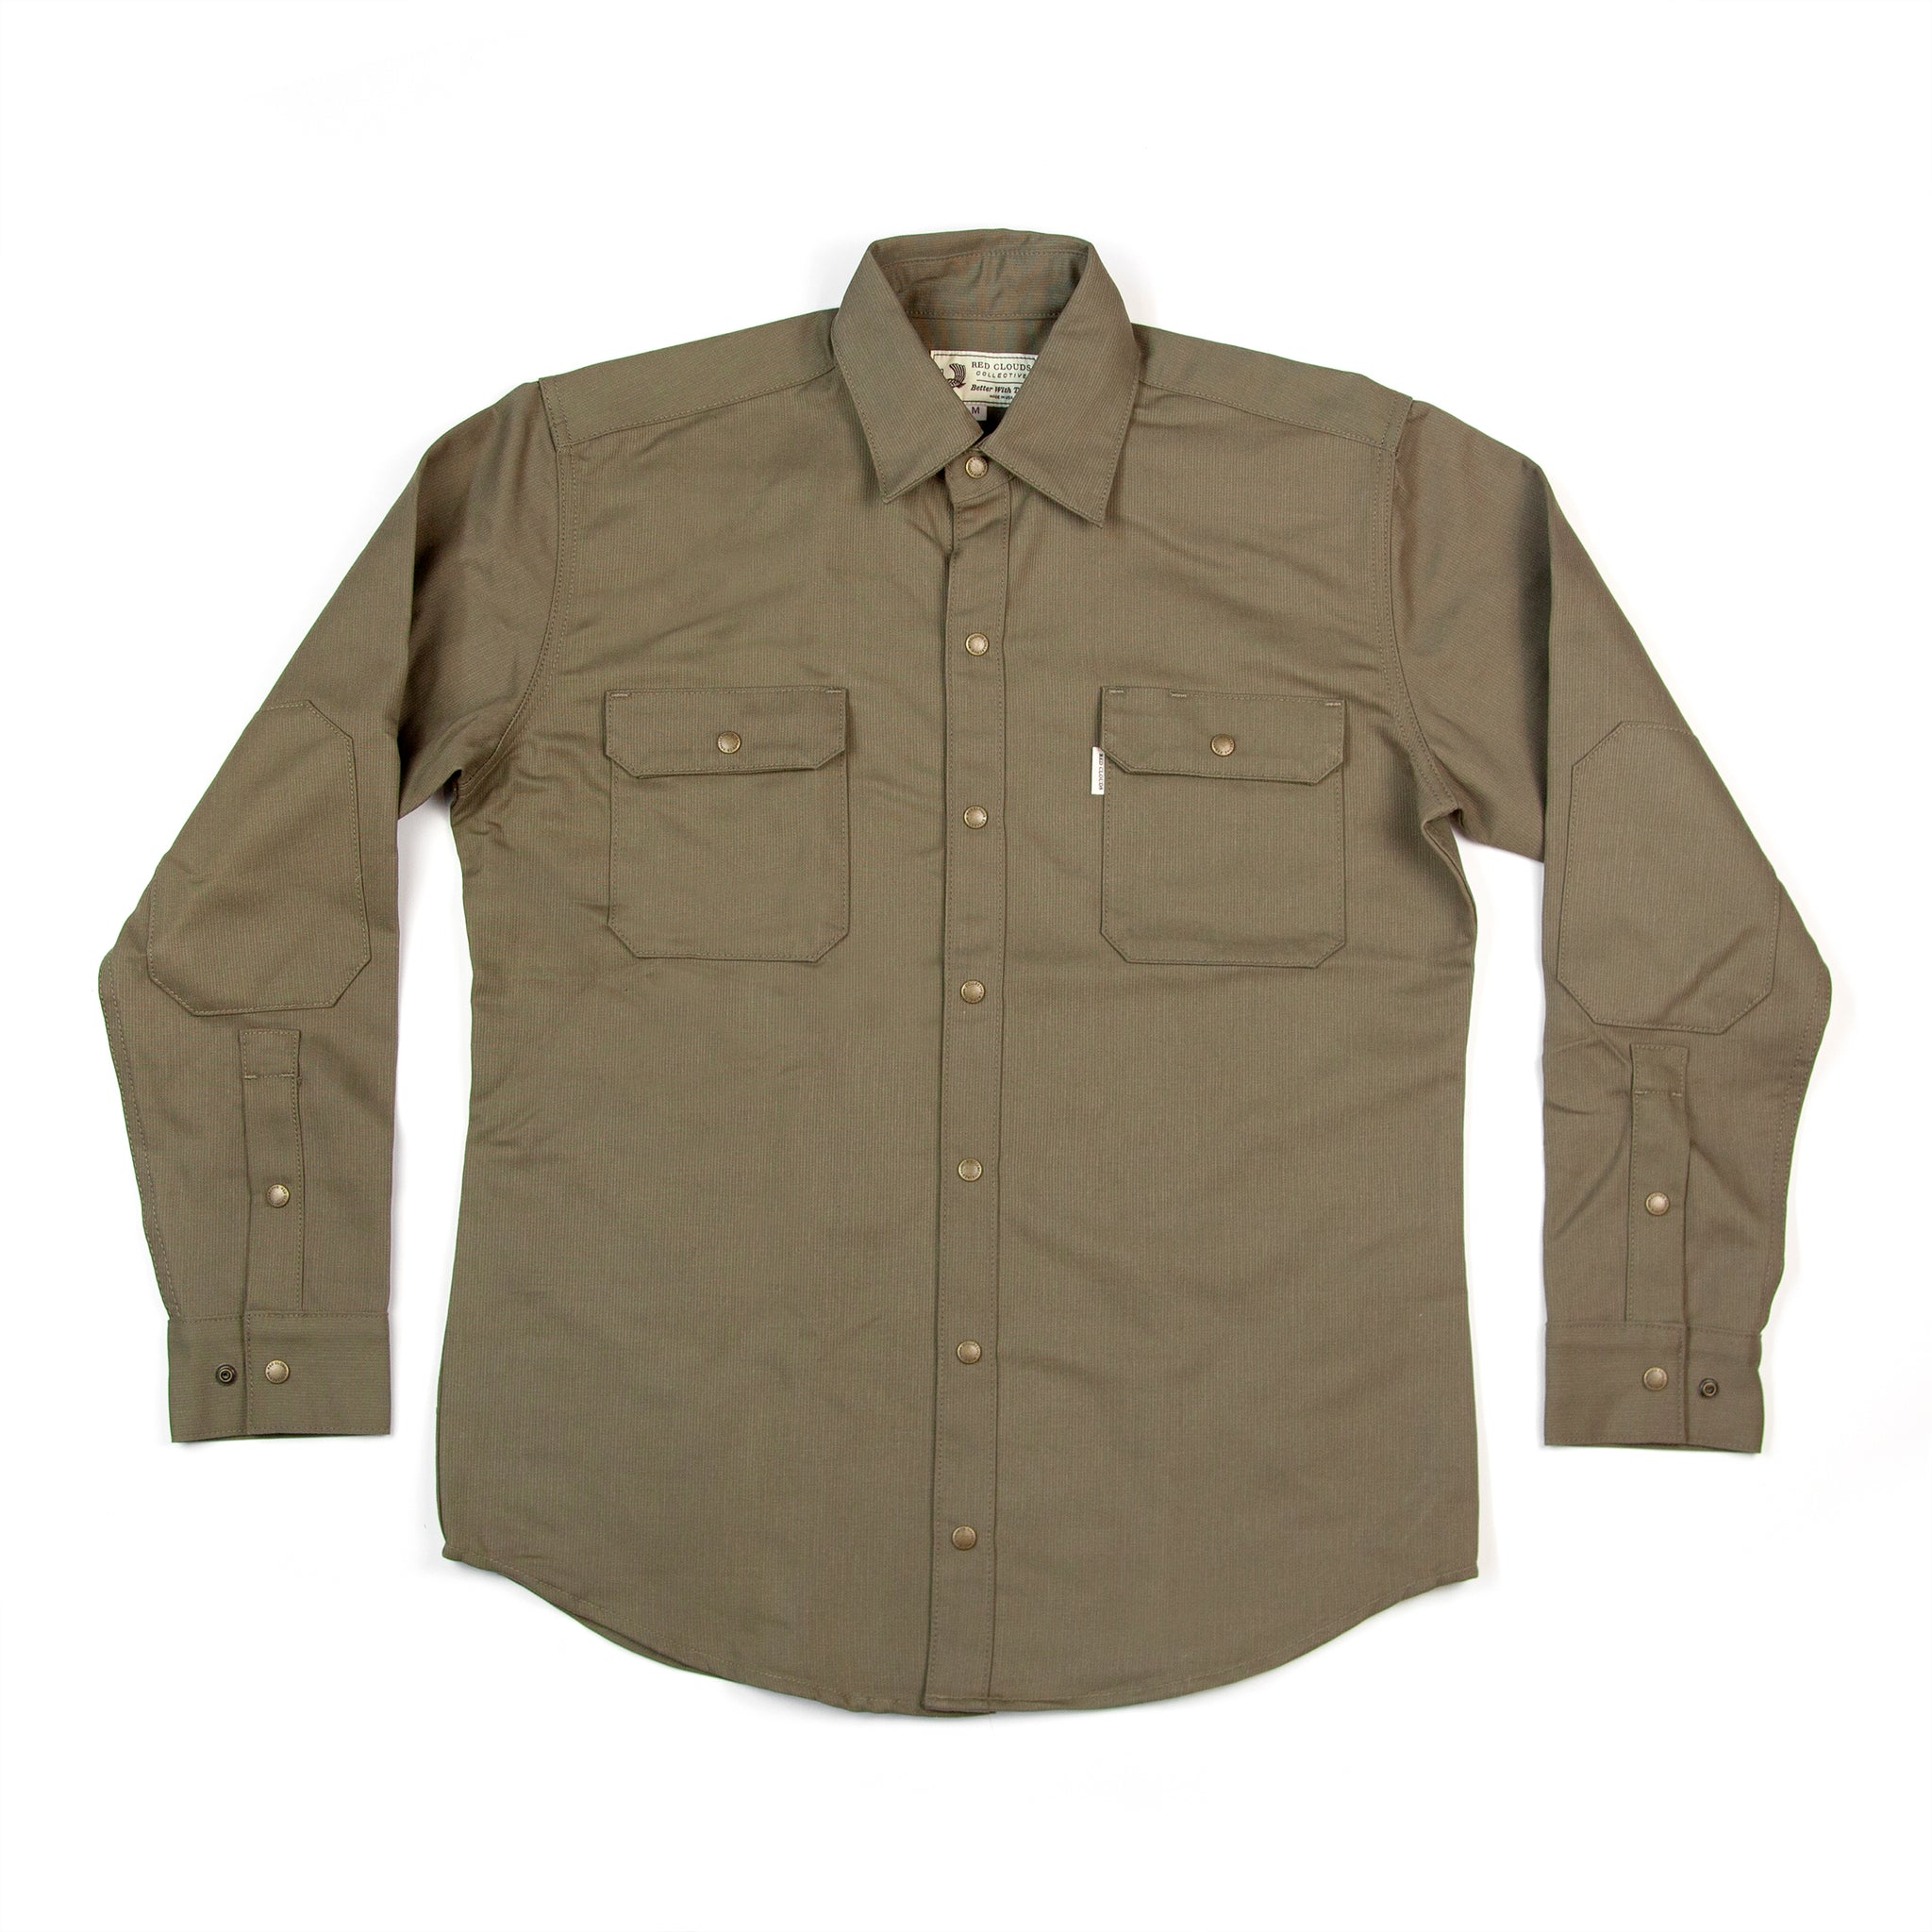 Witham Work Shirt - Bedford Cord